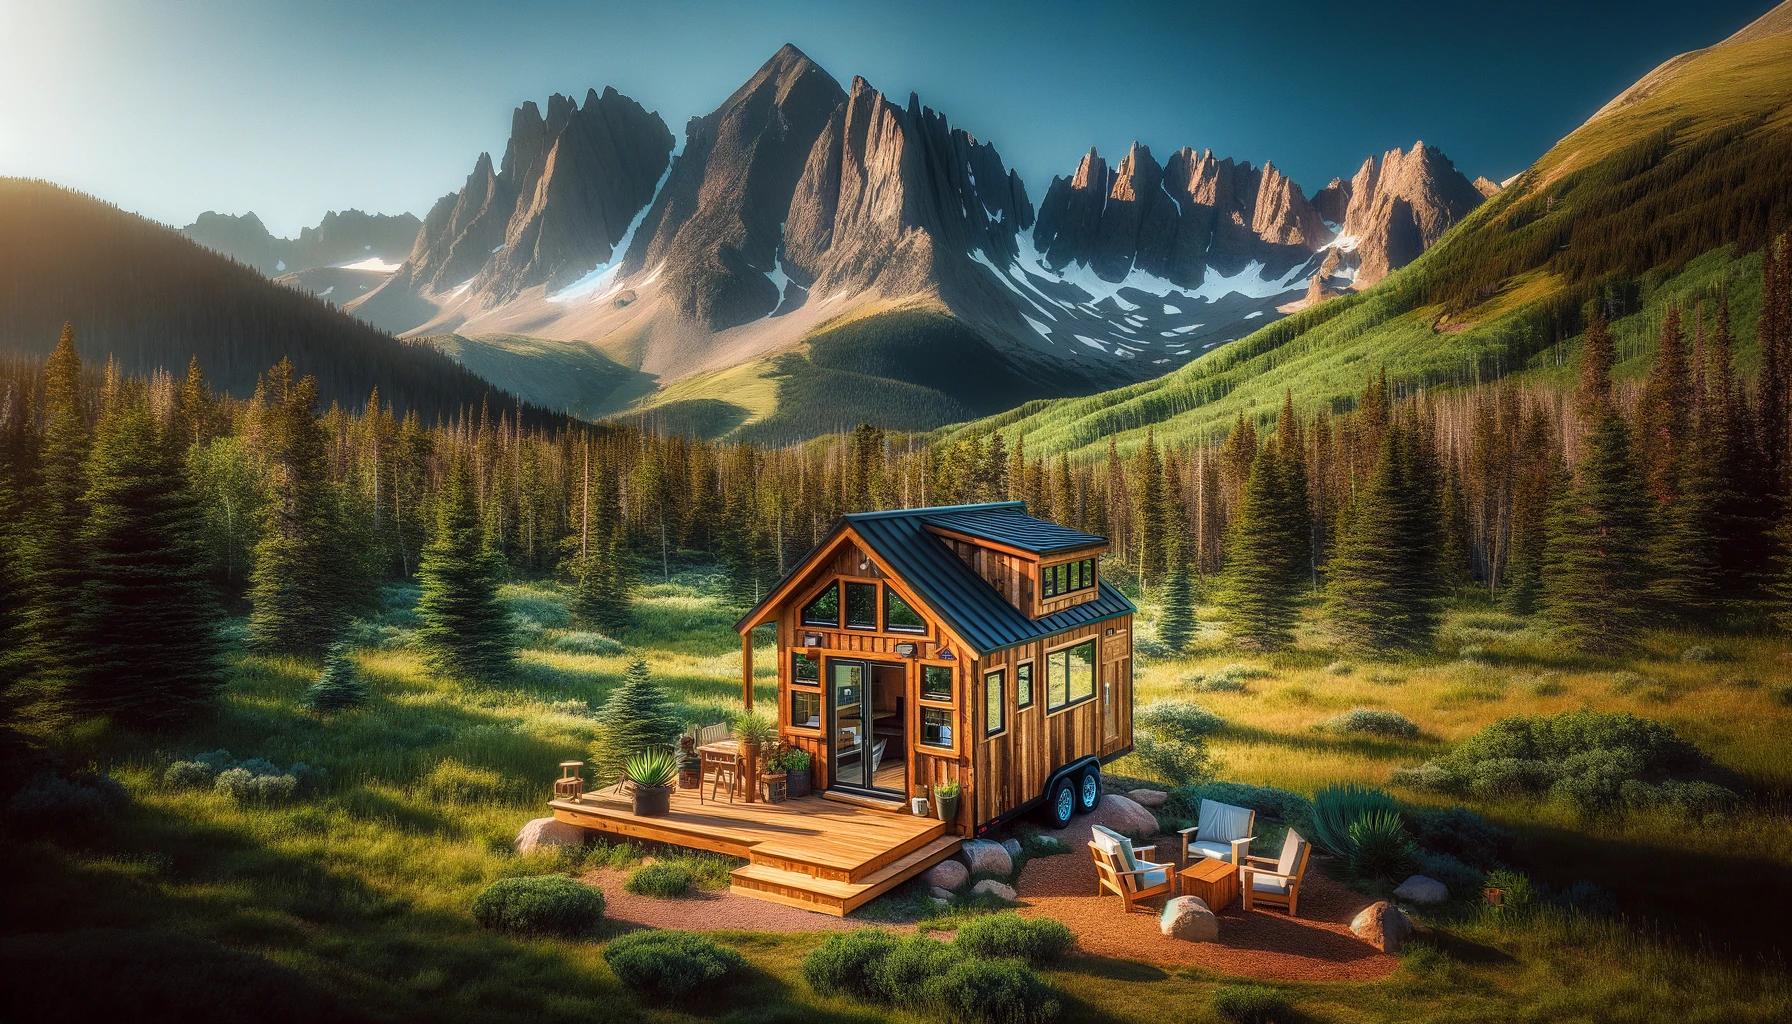 21 Tiny Houses For Rent in Colorado